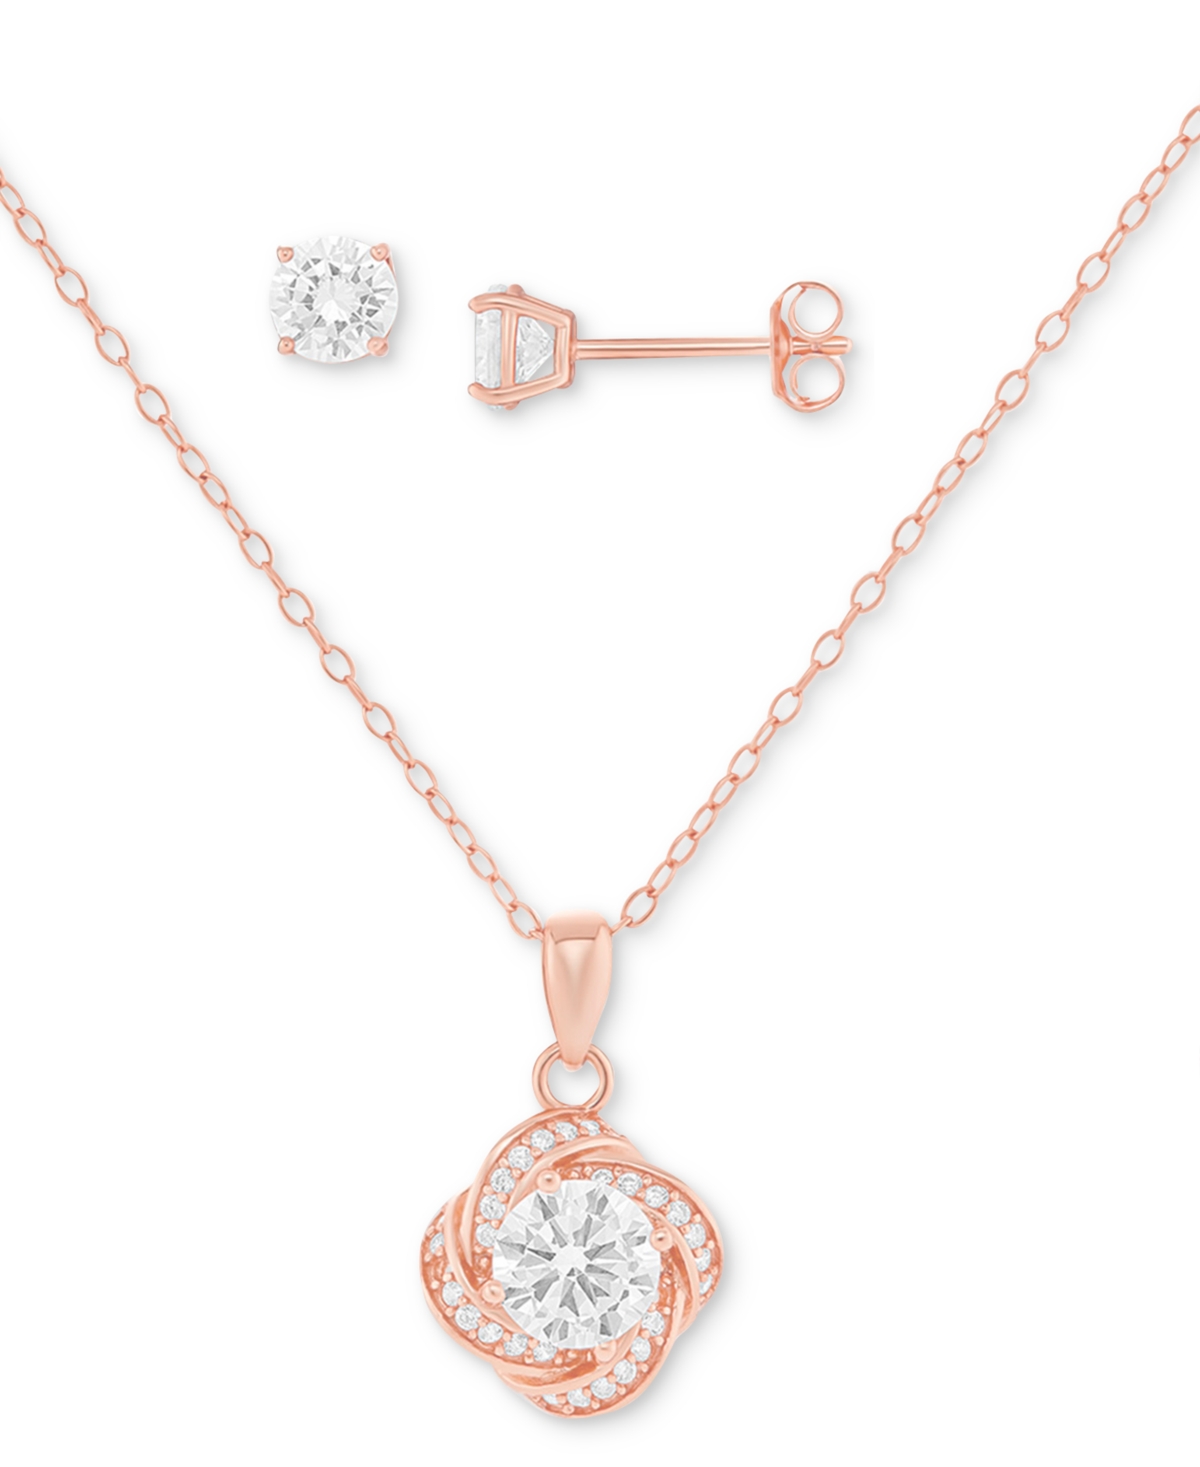 2-Pc. Set Cubic Zirconia Swirl Pendant Necklace & Solitaire Stud Earrings in 18k Gold-Plated Sterling Silver, Created for Macy's - Gold